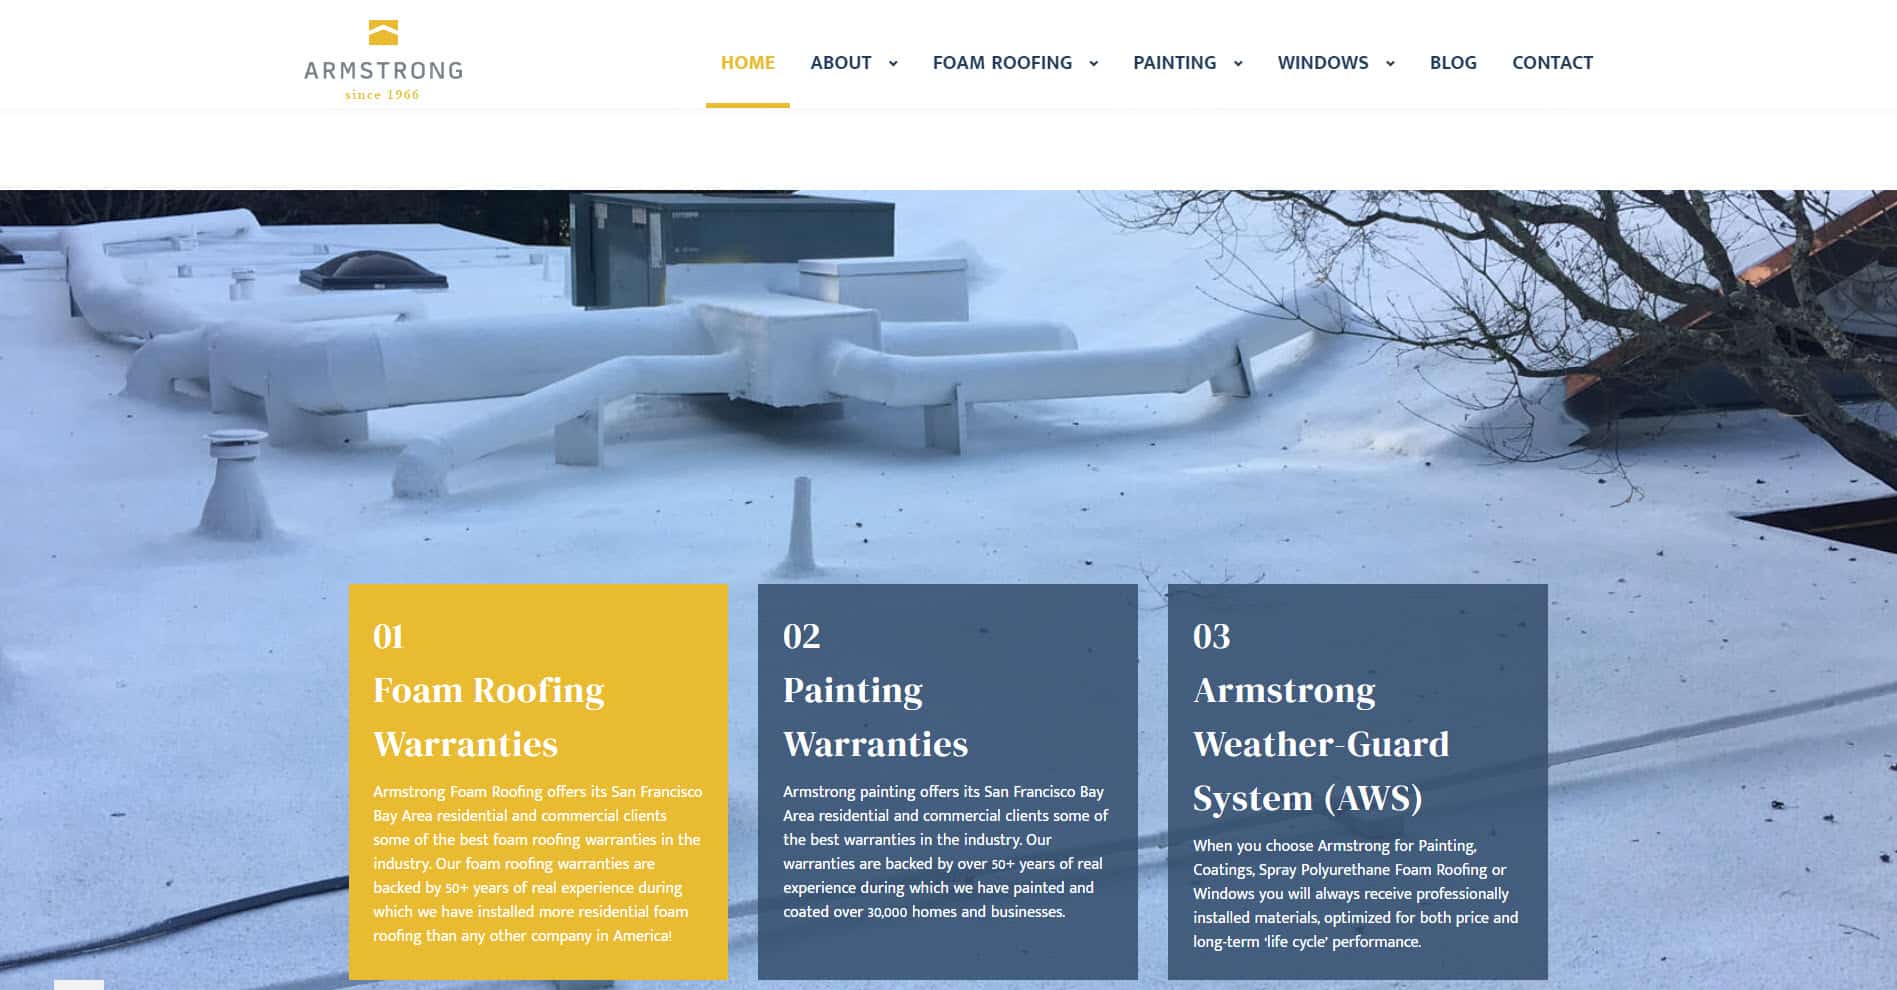 Homepage for new Armstrong Foam Roofing Website developed by Savvy Search Marketing